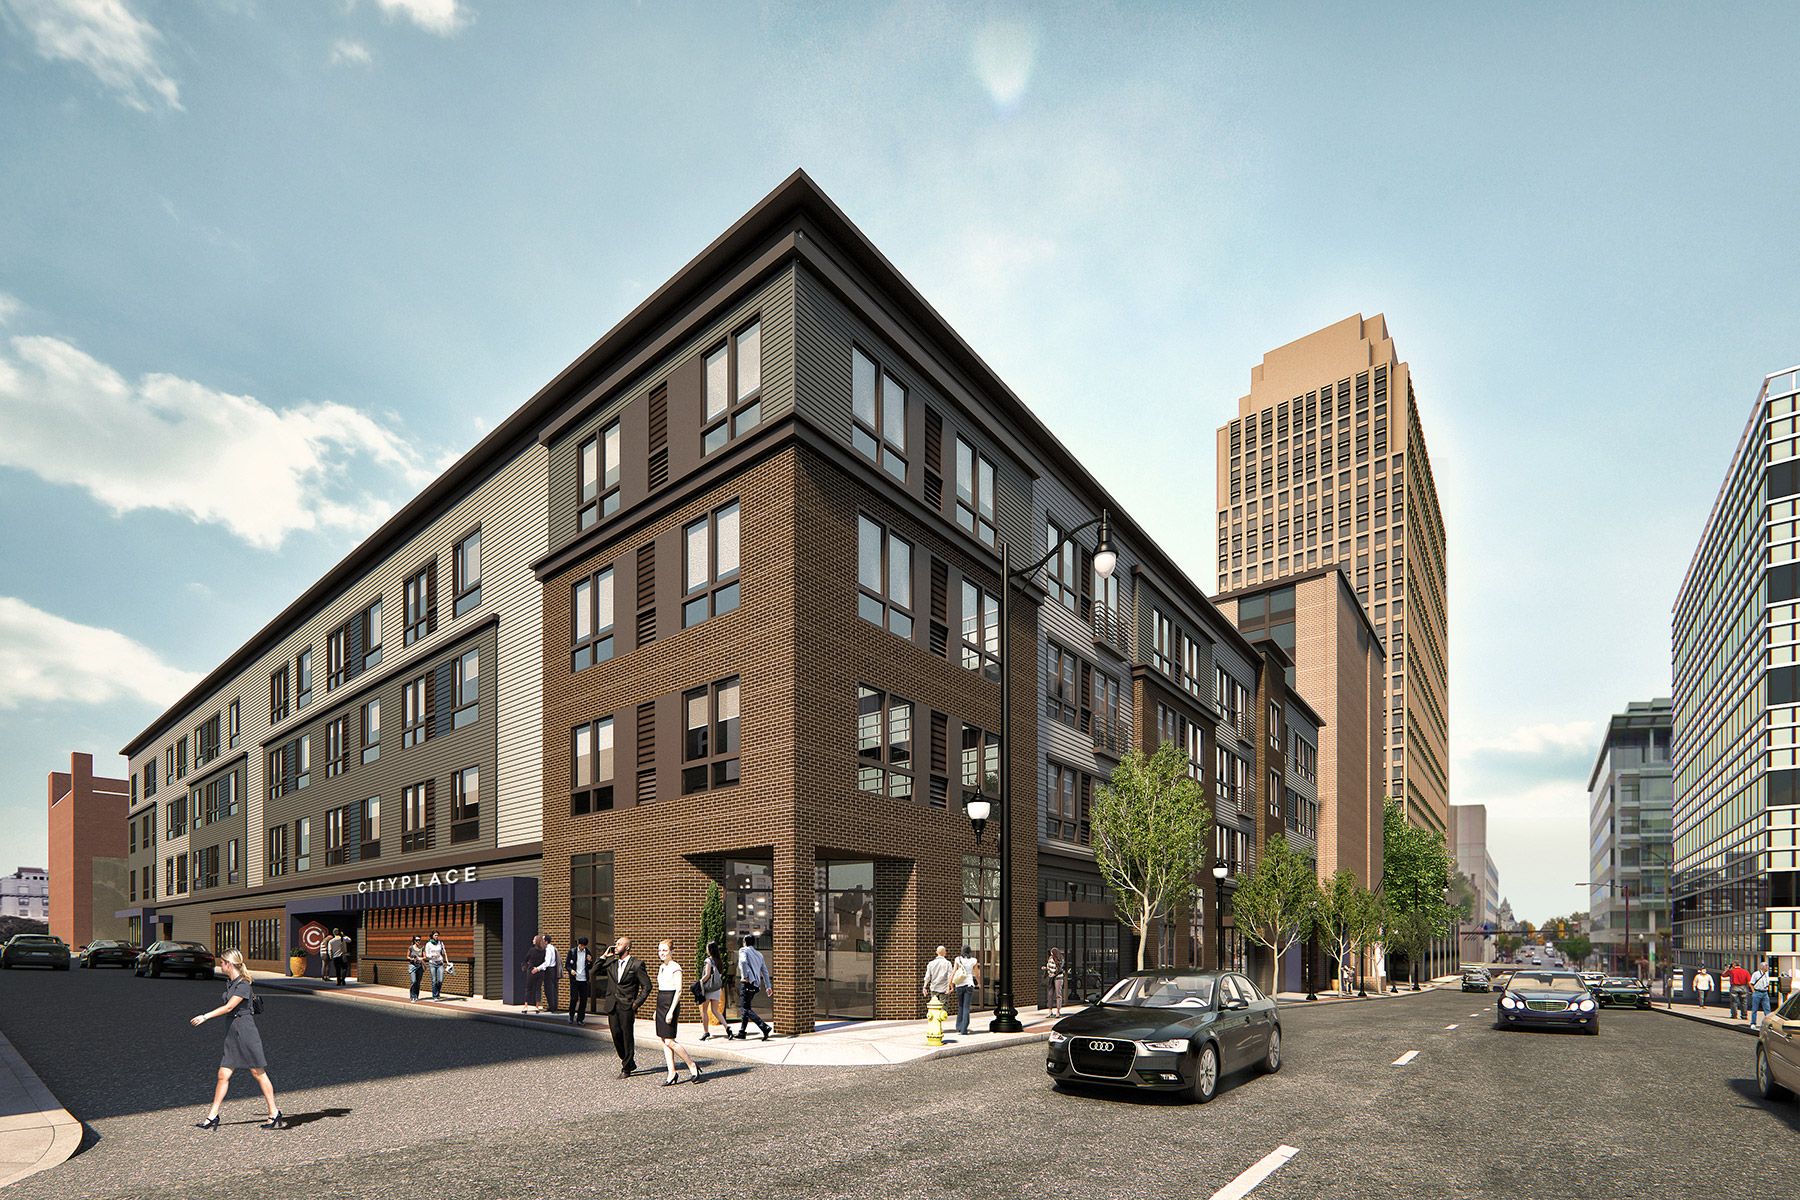 City Center Residential Announces Plans to Develop Apartment Community at 9th and Hamilton Streets